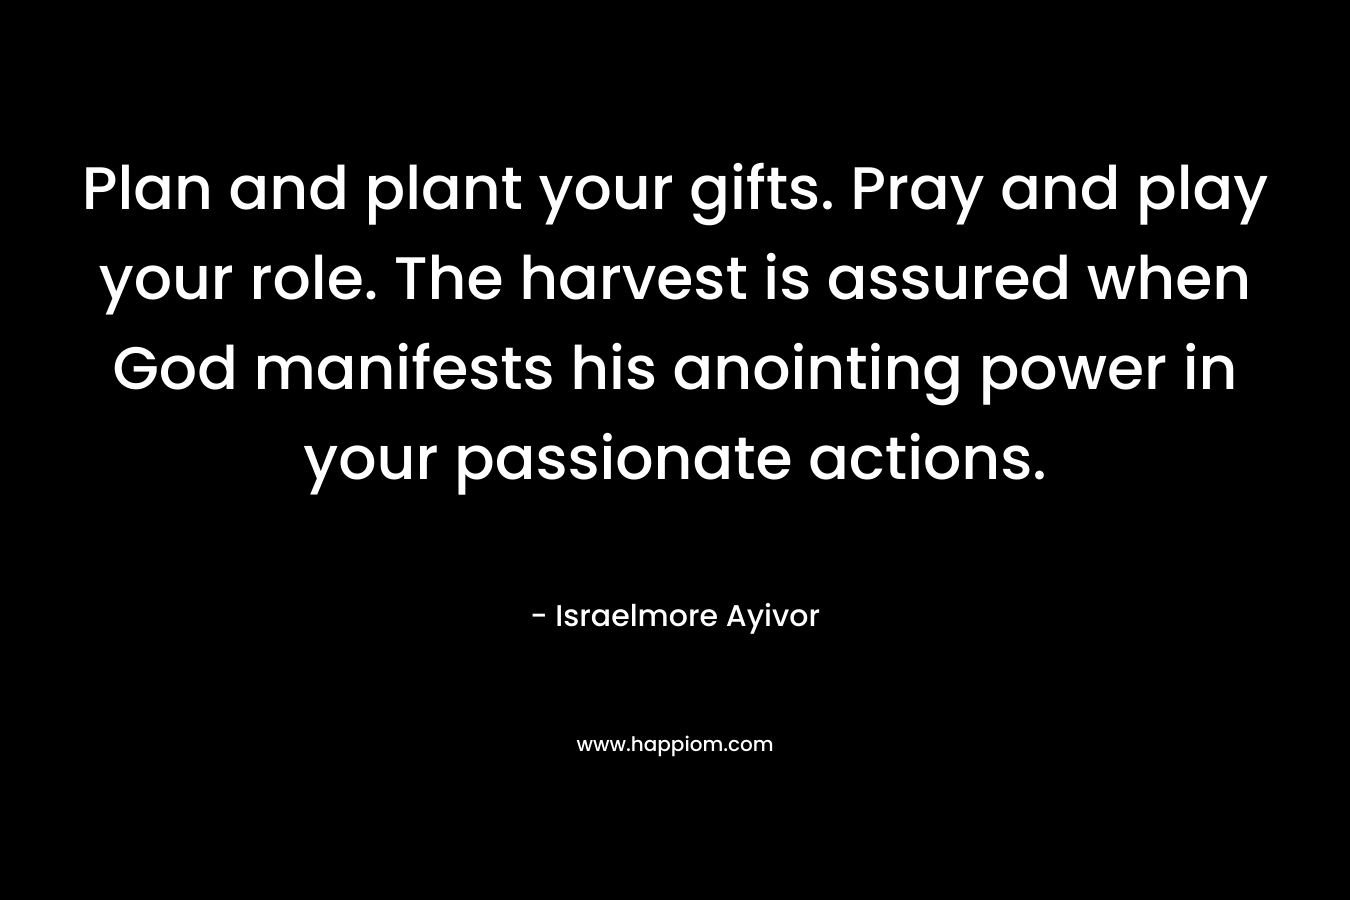 Plan and plant your gifts. Pray and play your role. The harvest is assured when God manifests his anointing power in your passionate actions. – Israelmore Ayivor